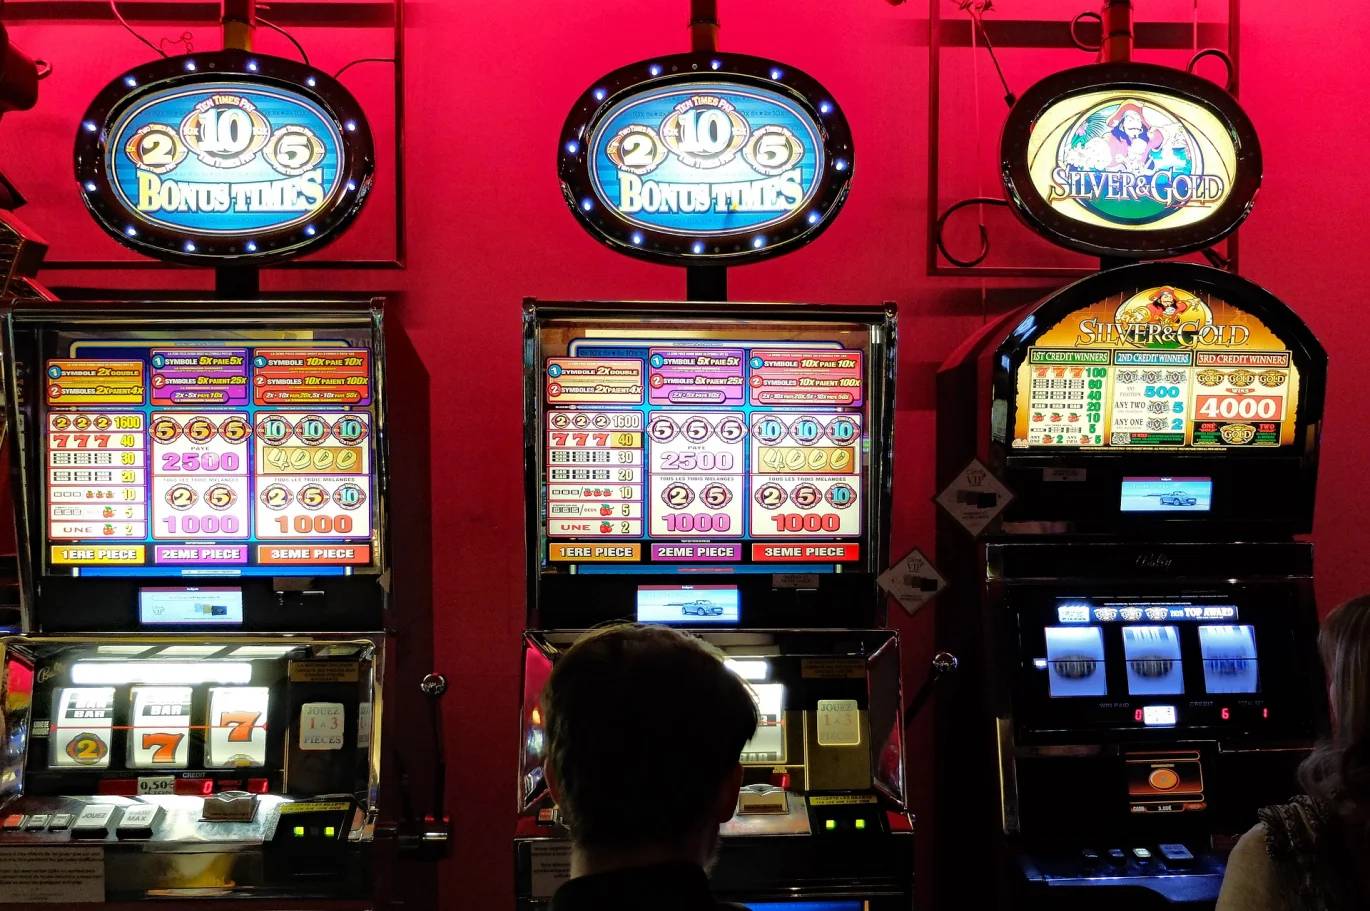 How do you know when a slot machine will hit?